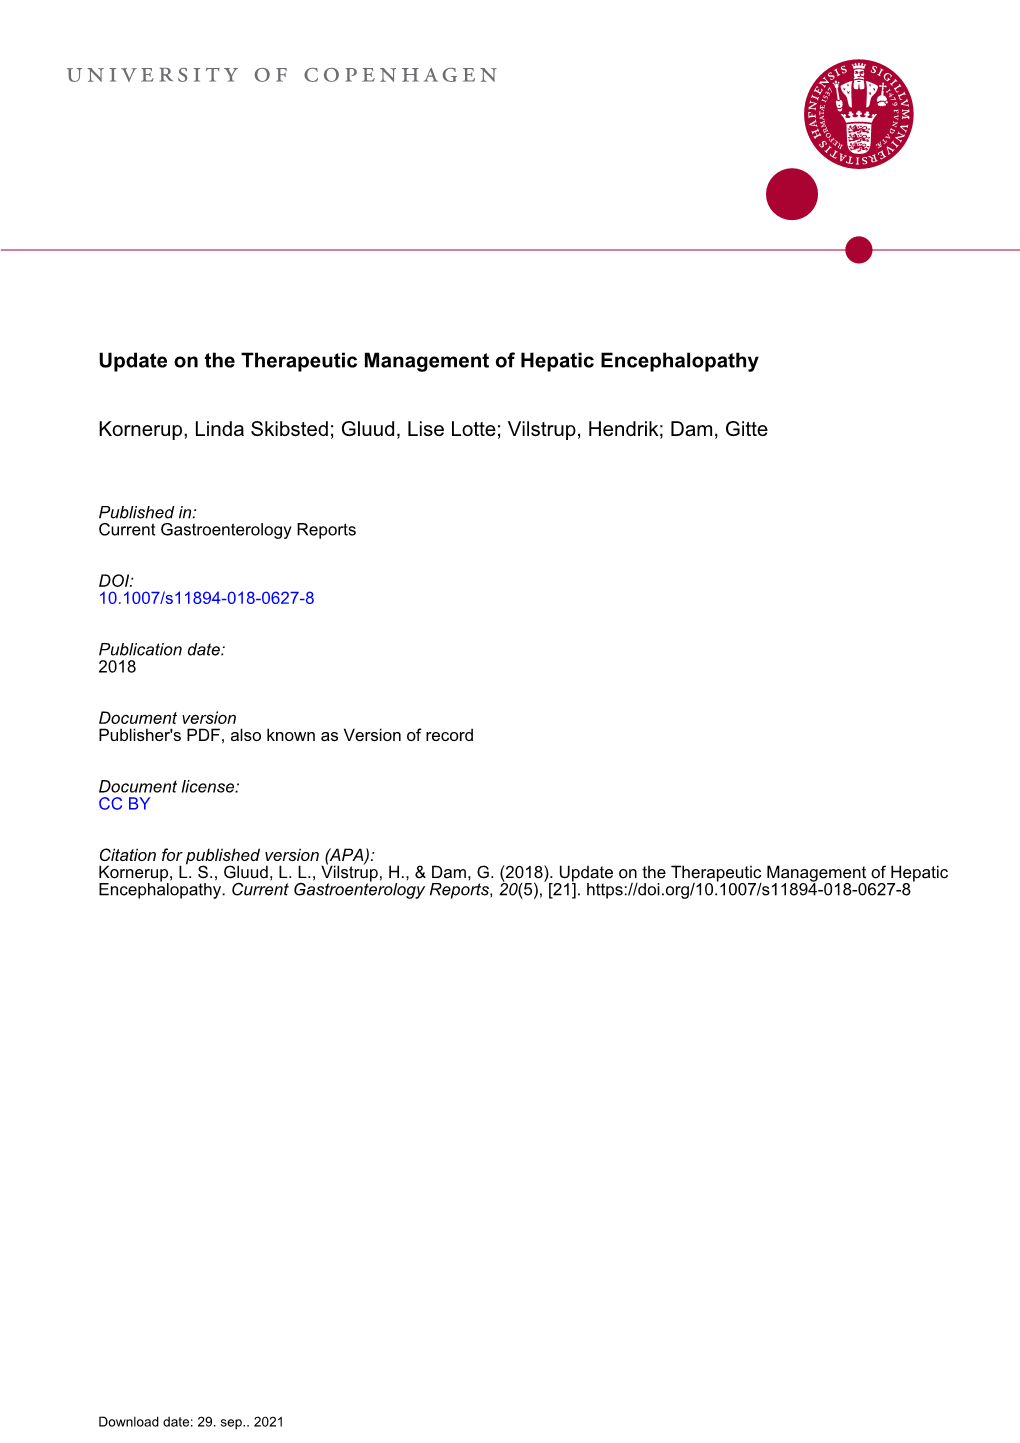 Update on the Therapeutic Management of Hepatic Encephalopathy